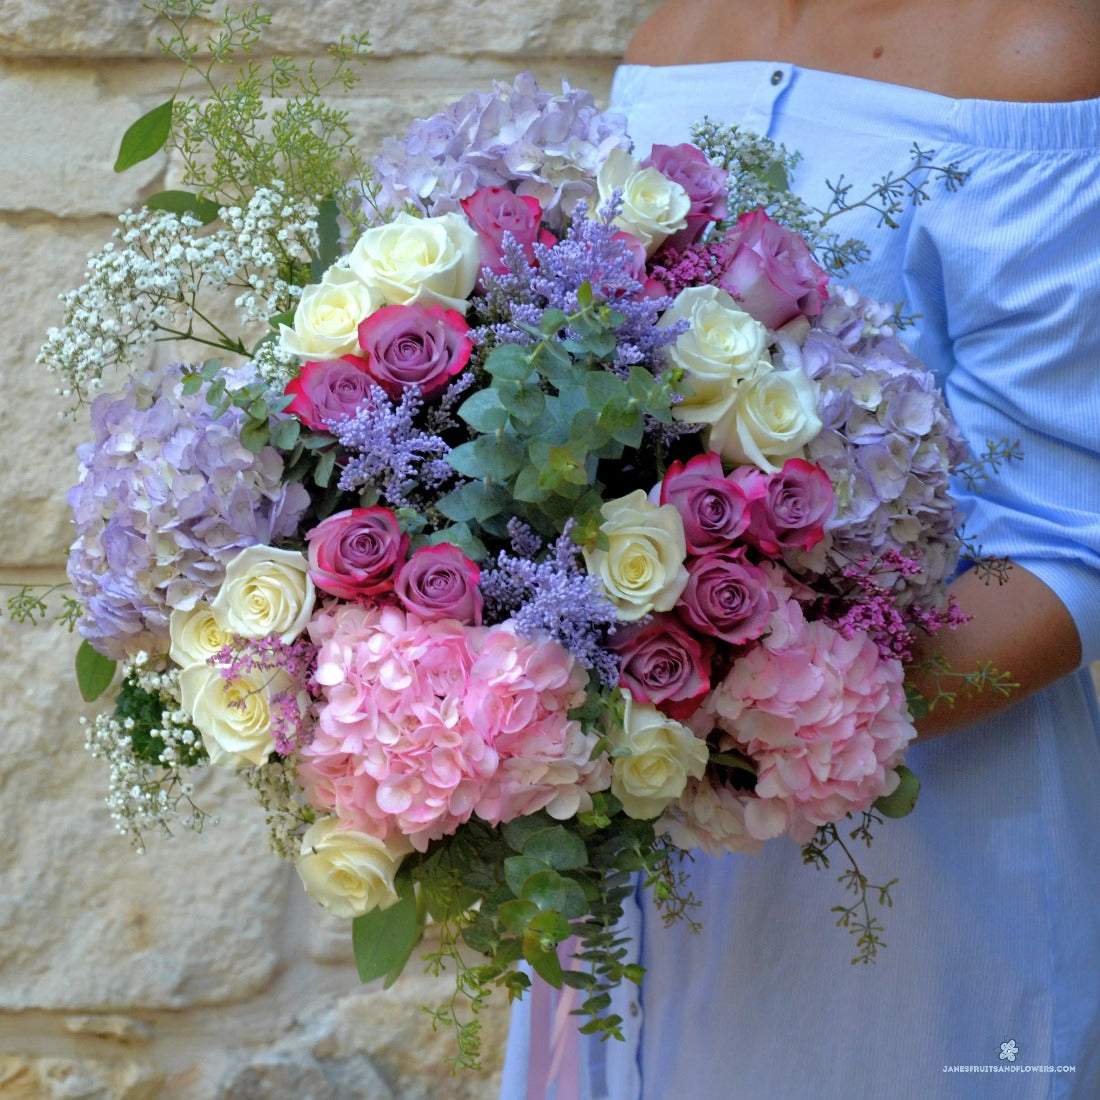 Designer's Choice Bouquet - Janes Fruits and Flowers